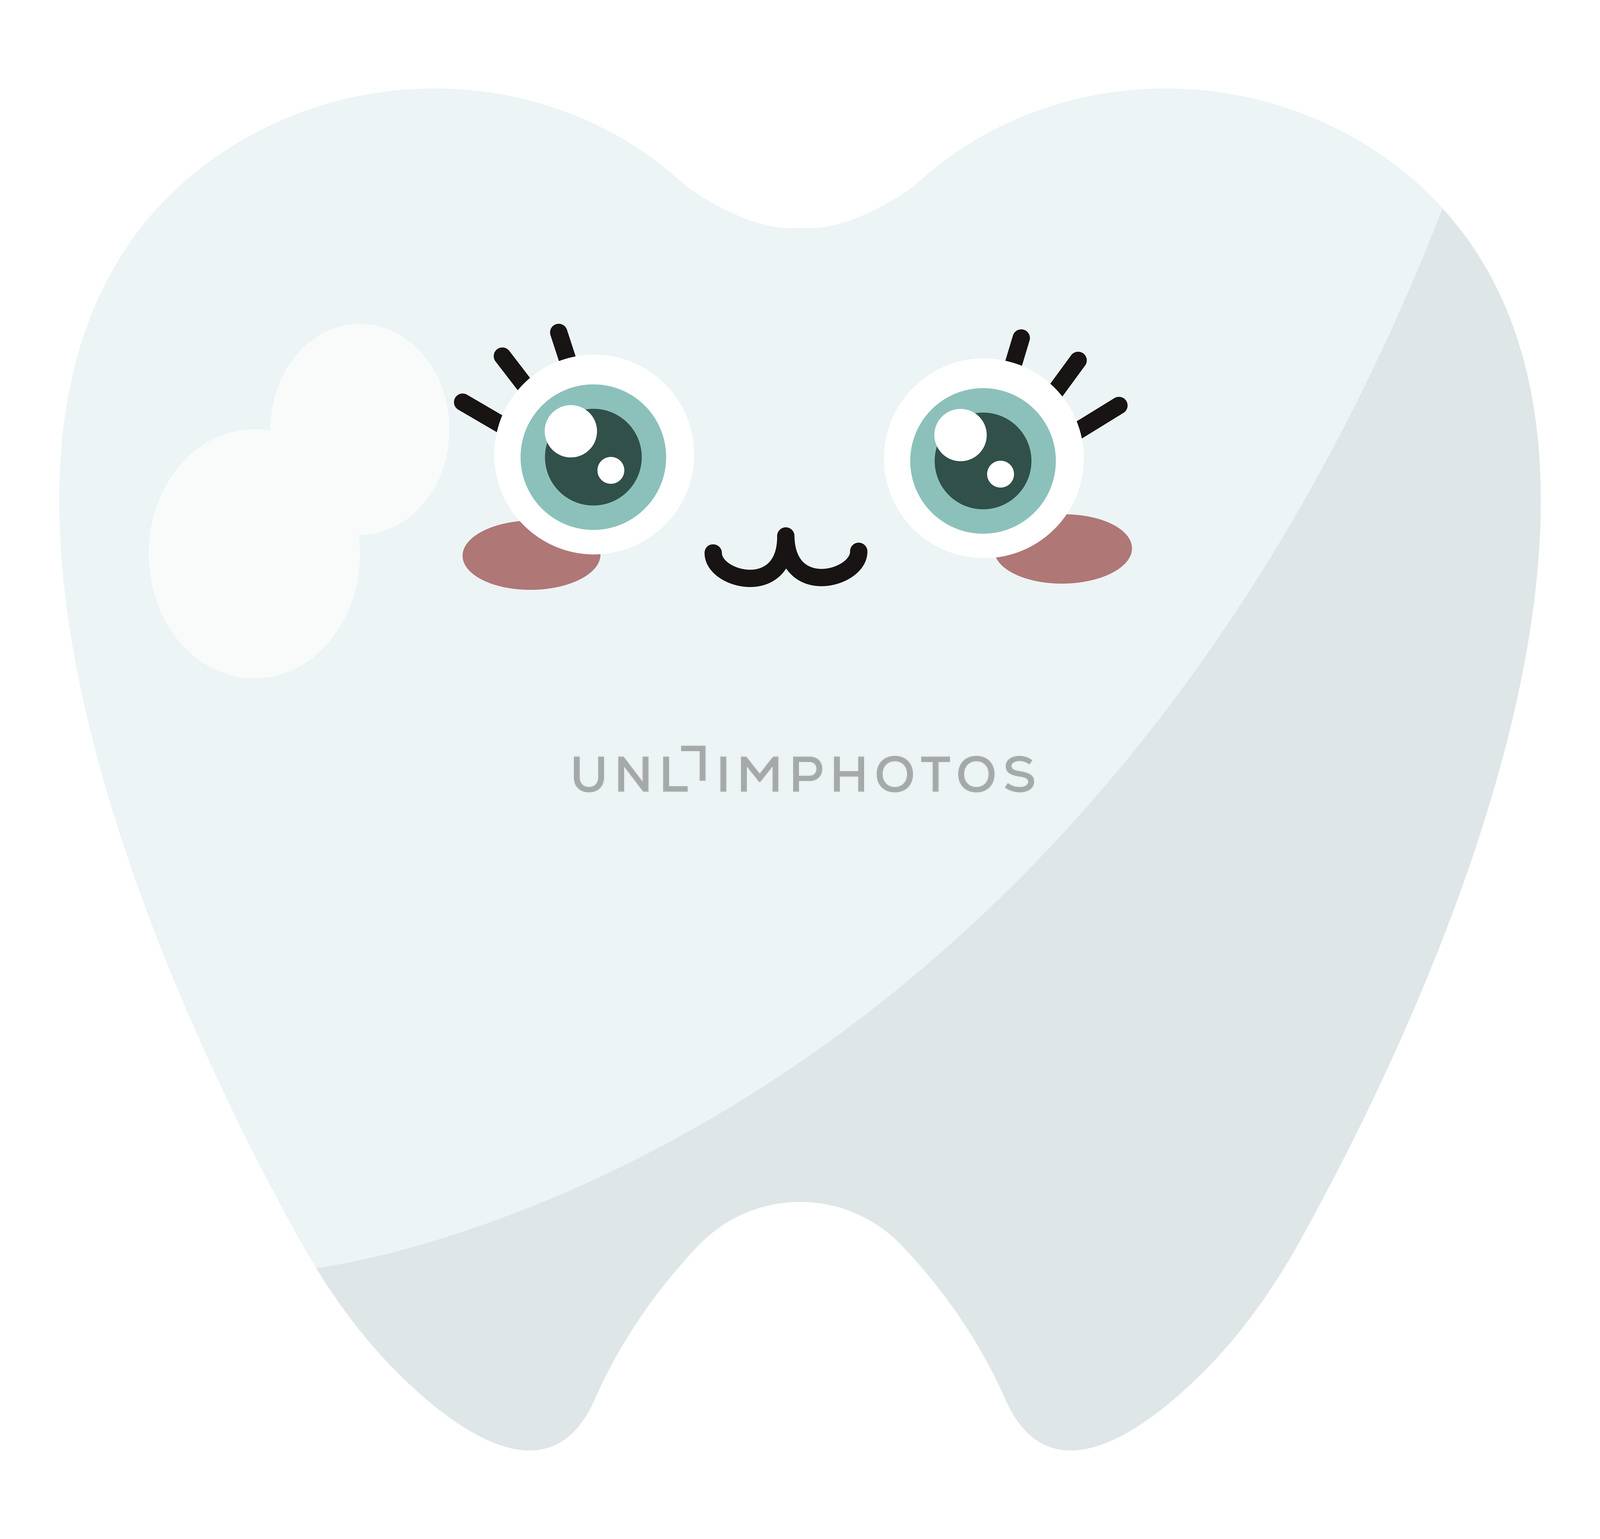 Cute tooth , illustration, vector on white background